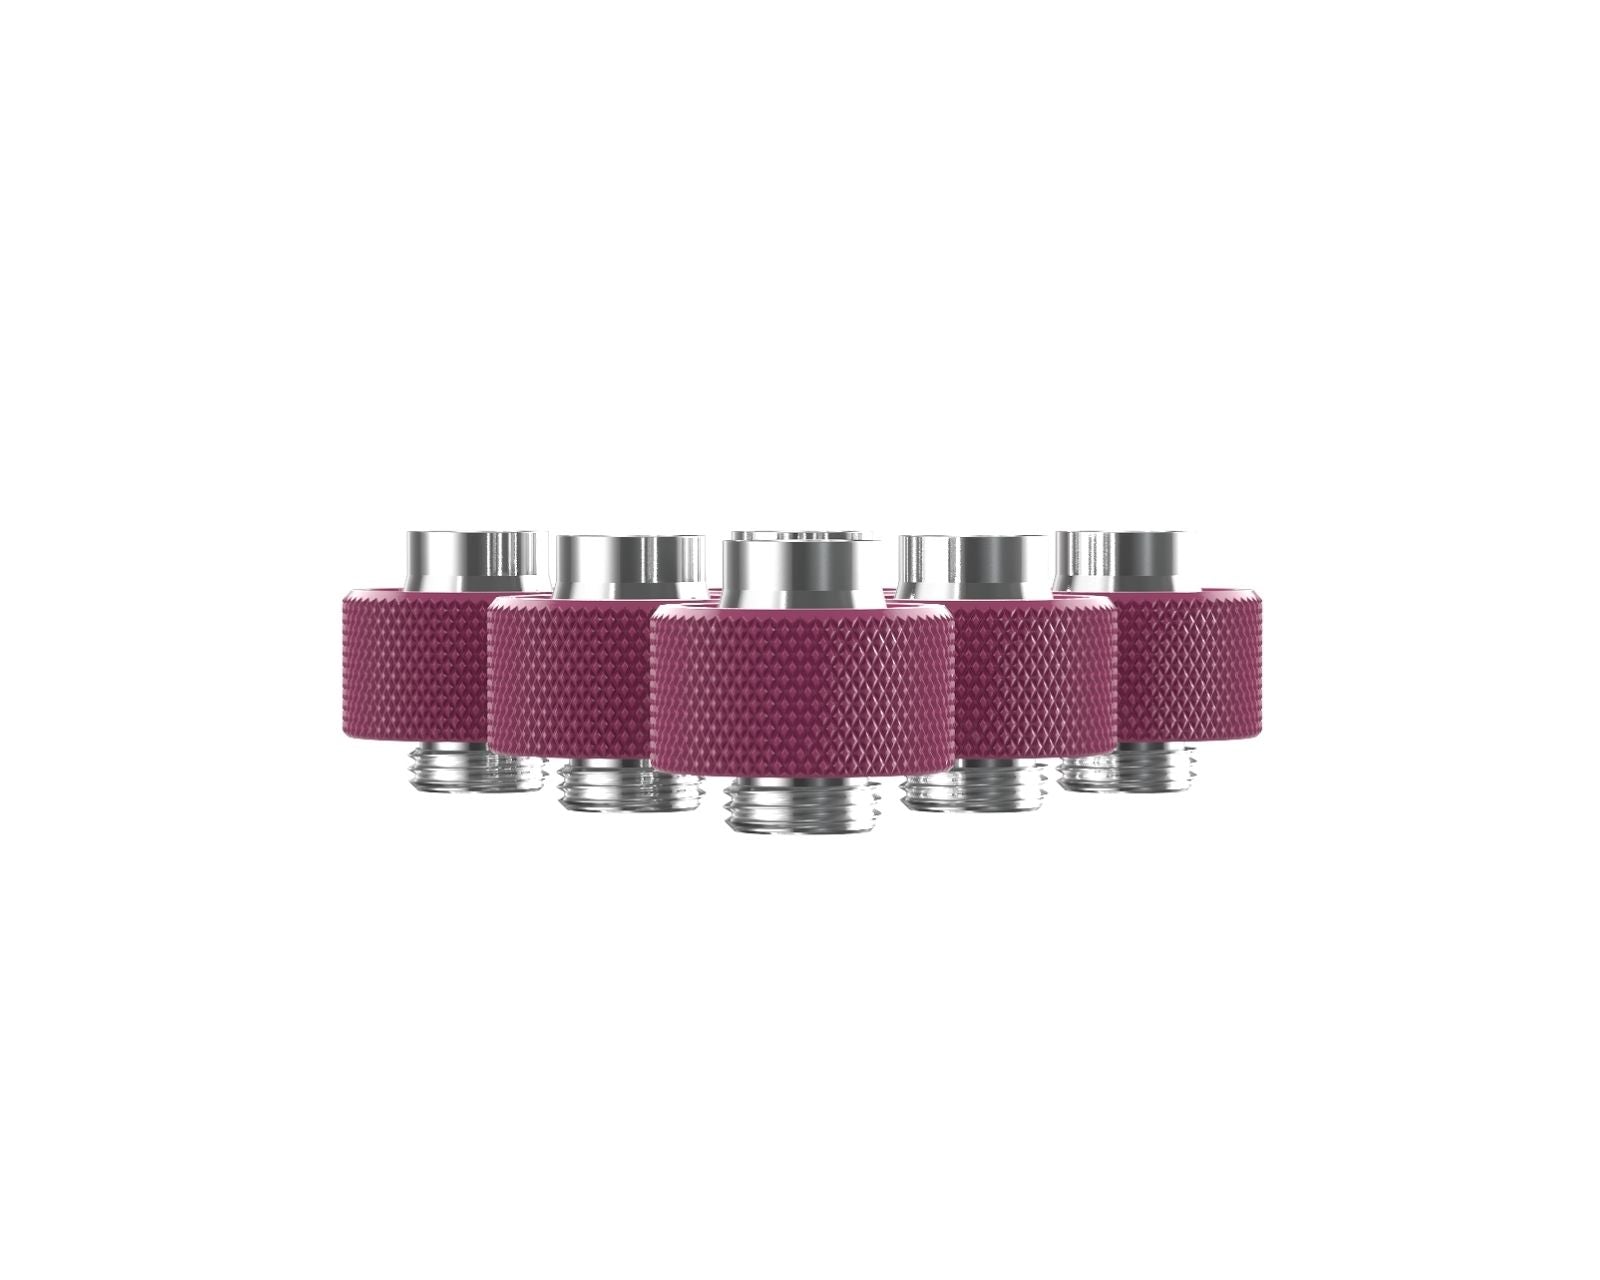 PrimoChill SecureFit SX - Premium Compression Fittings 6 Pack - For 1/2in ID x 3/4in OD Flexible Tubing (F-SFSX34-6) - Available in 20+ Colors, Custom Watercooling Loop Ready - Magenta